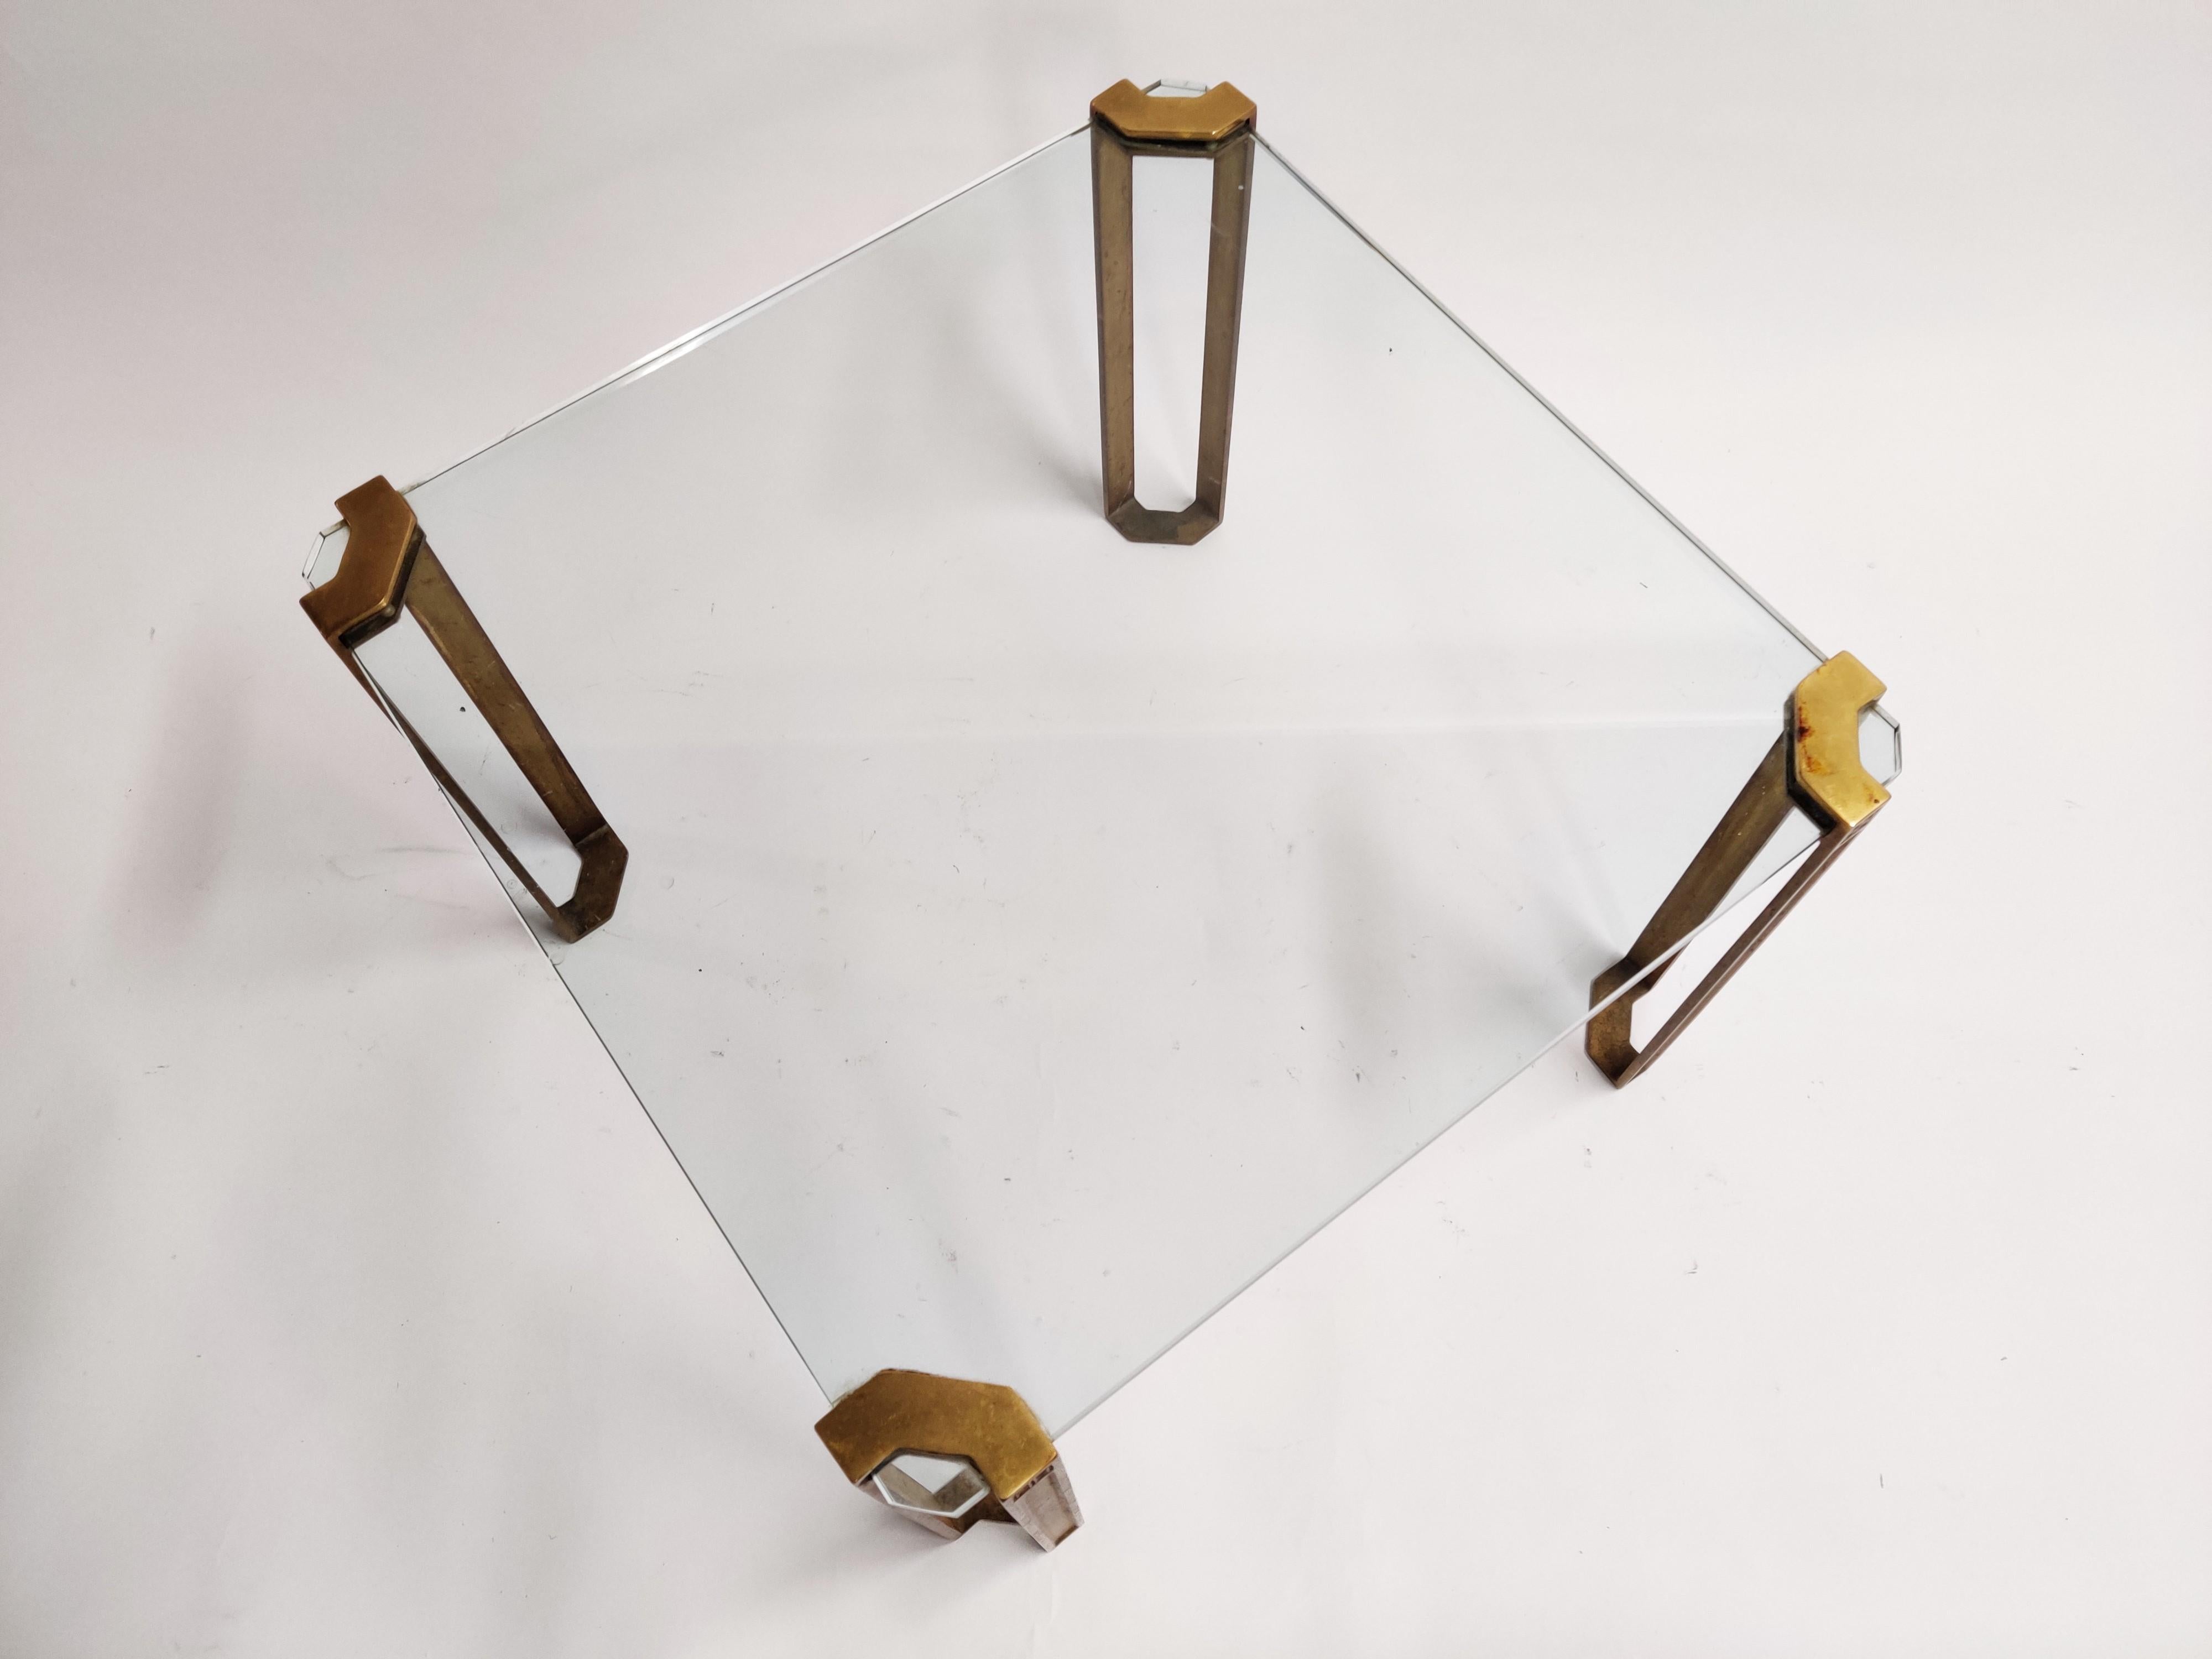 T24 Pioneer square end or coffee table made from cast brass legs designed by Peter Ghyczy.

Beautiful design featuring his pioneering casting techniques and way of suspending glass and metal.

Thick 15 mm clear glass tabletop.

Beautiful